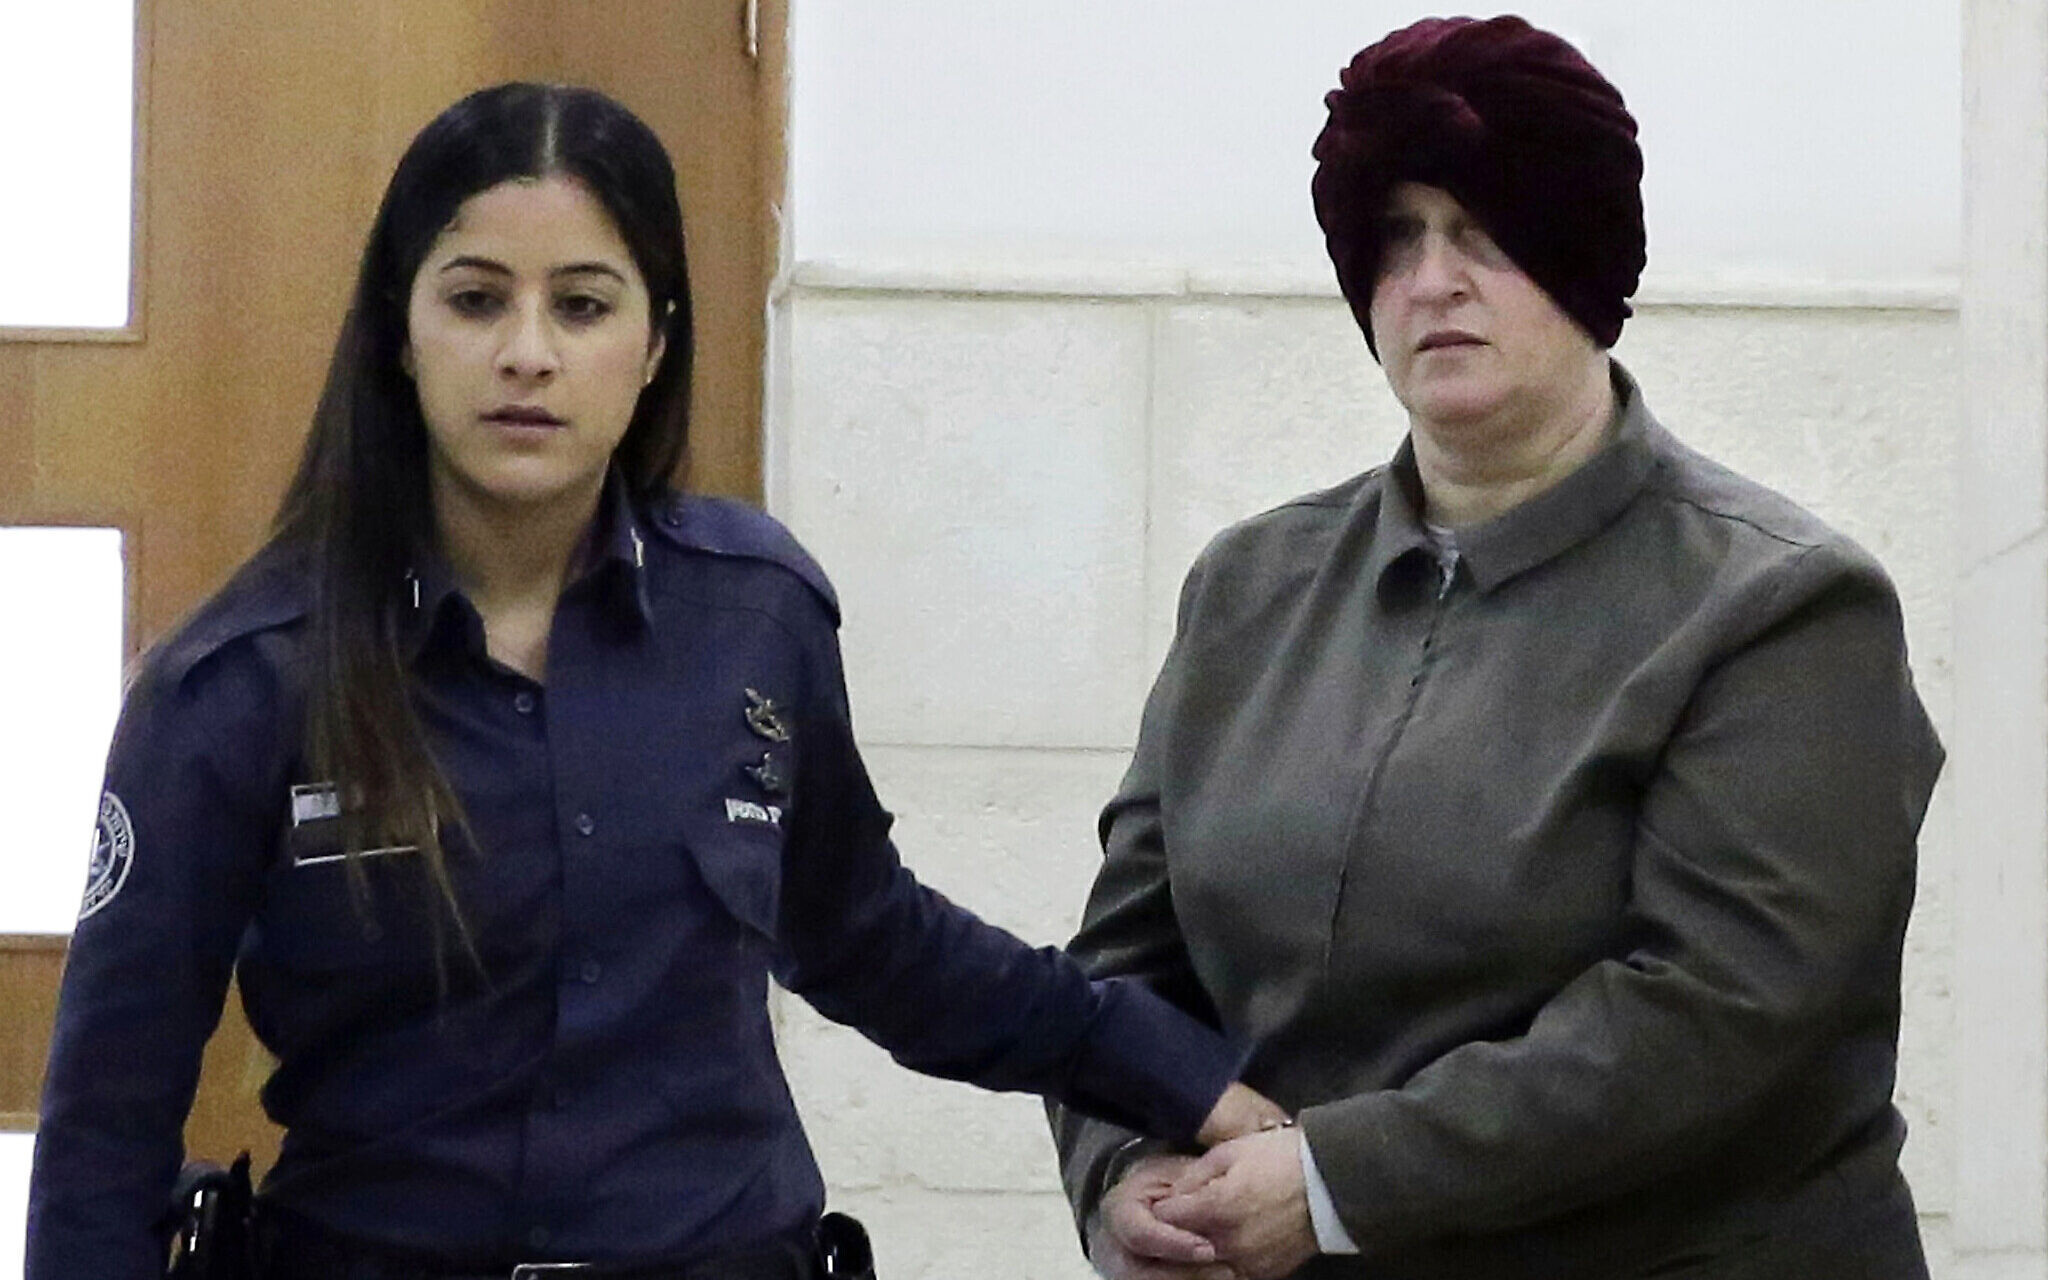 Court finds Malka Leifer guilty of rape, indecent assault at Australia  Jewish school | The Times of Israel